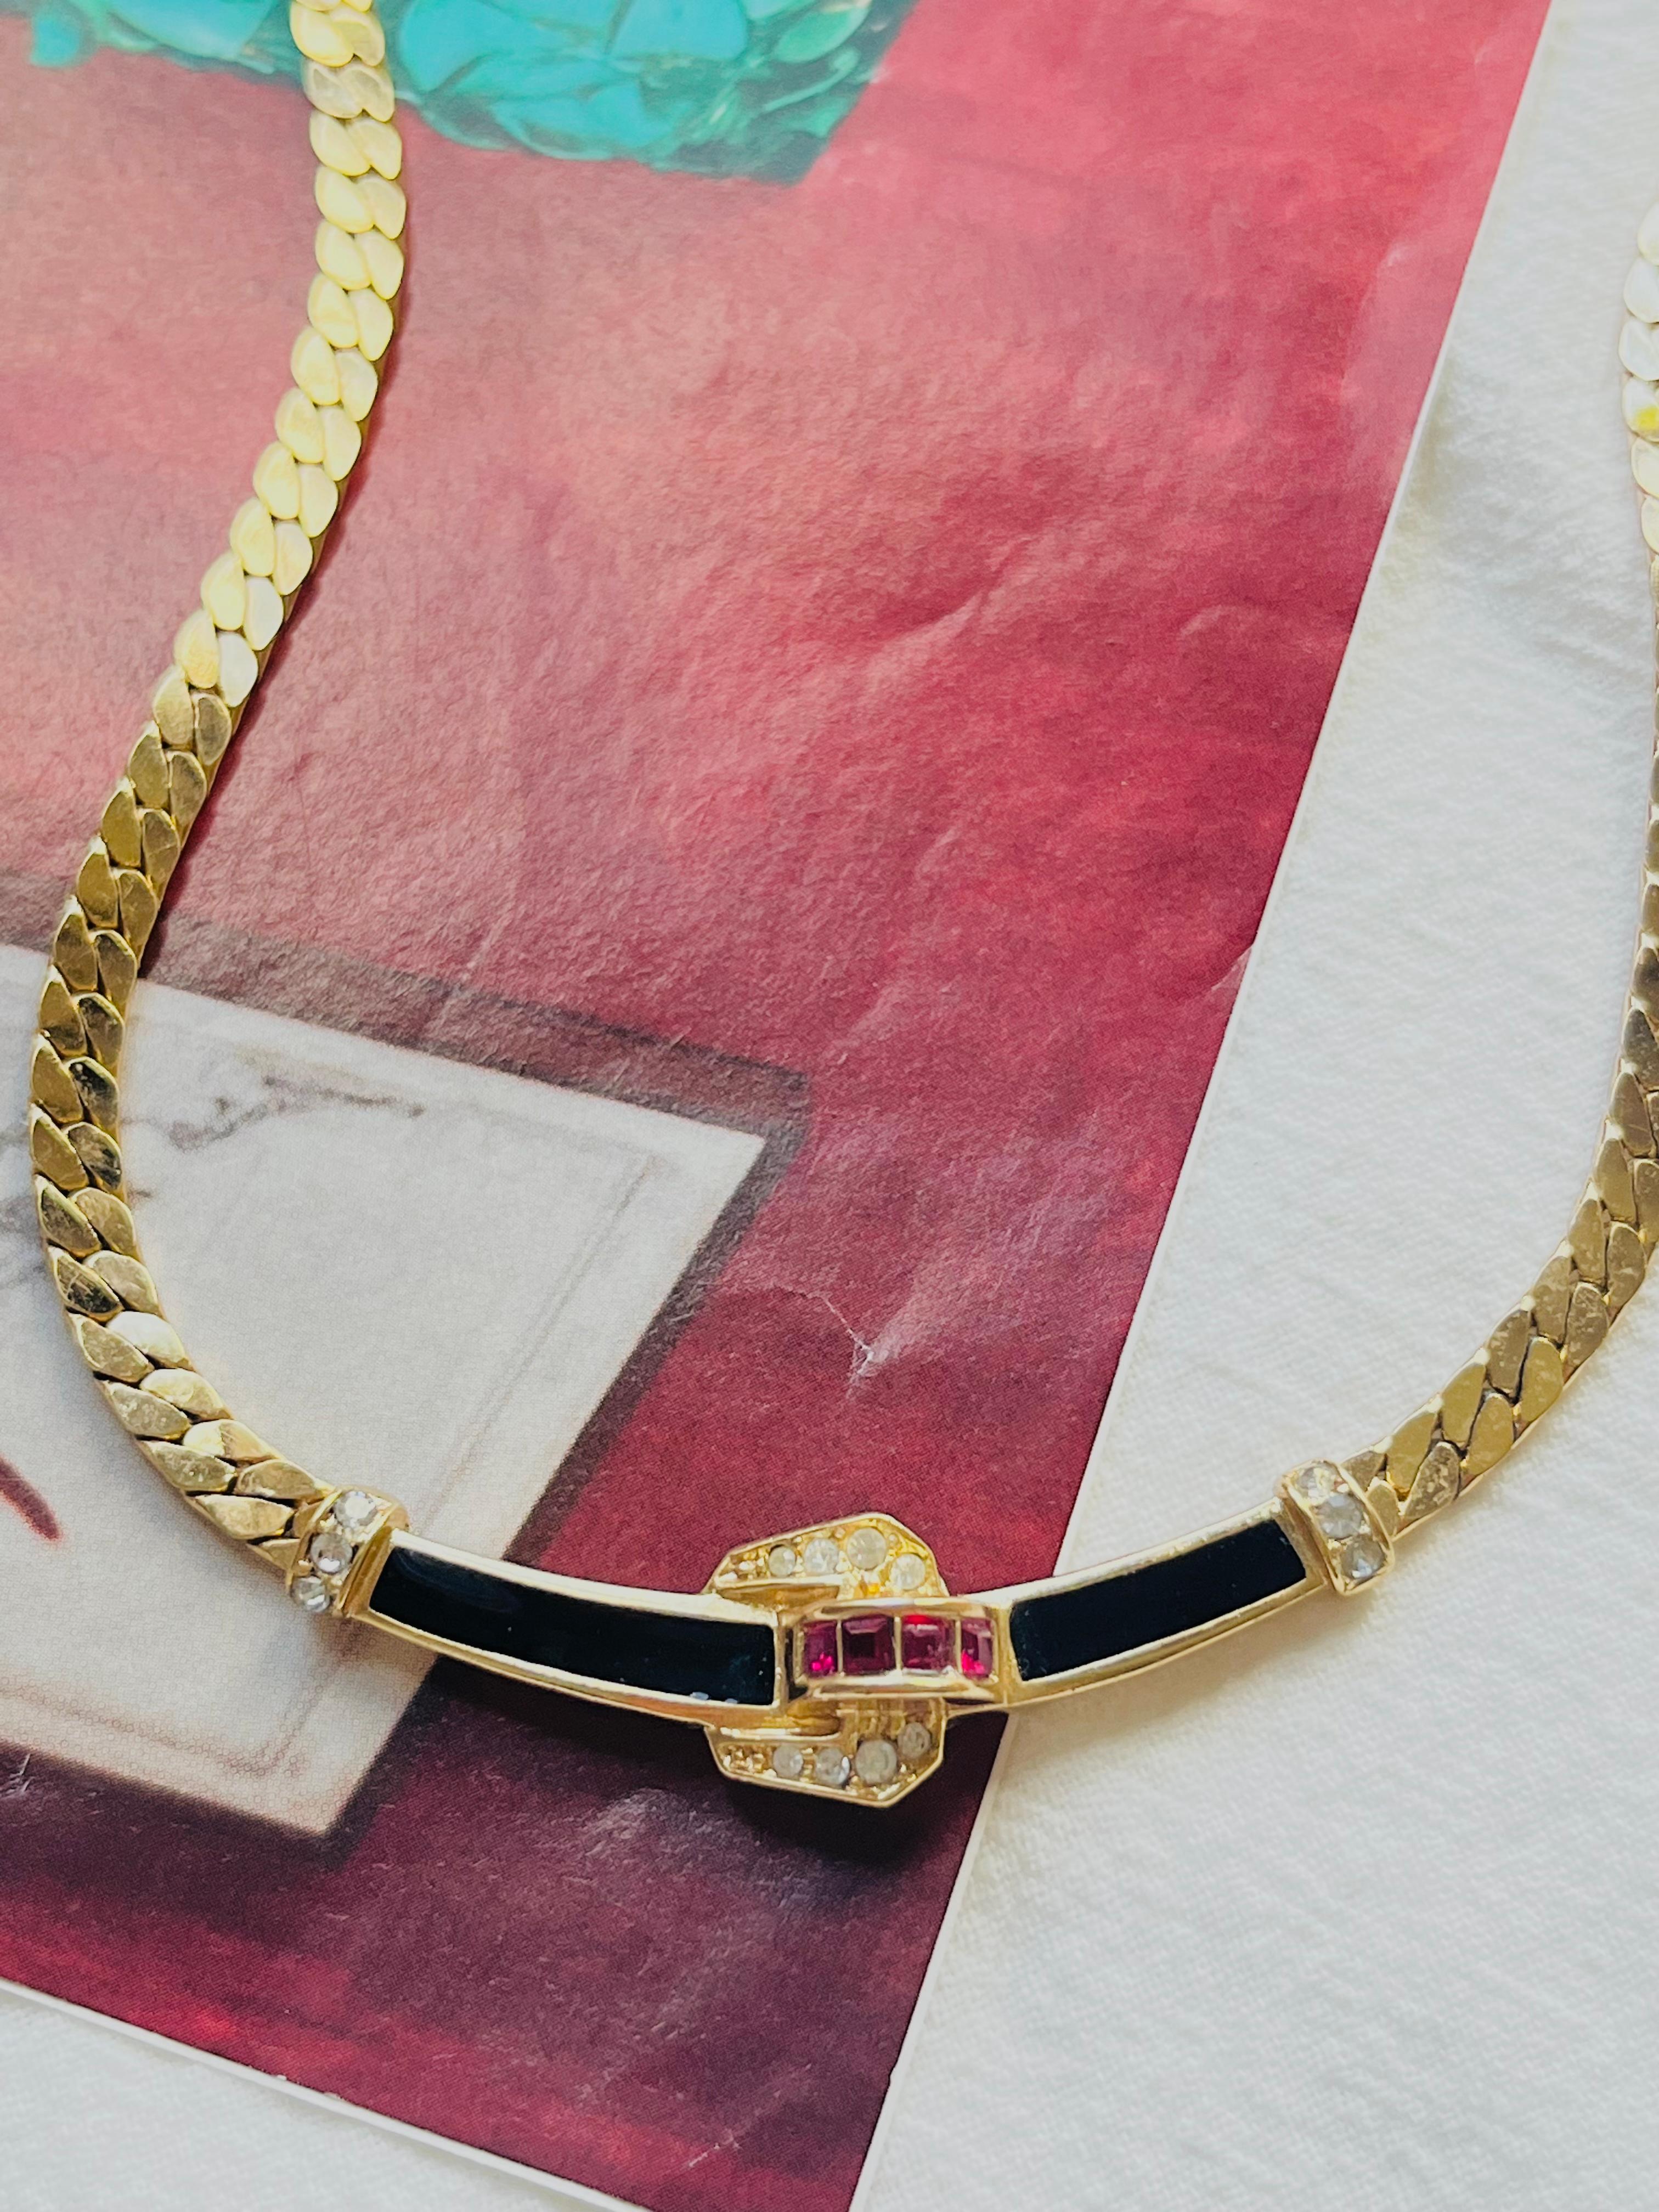 Christian Dior Vintage 1980s Black Ruby White Crystals Long Pendant Necklace, Gold Plated

Very excellent condition. Very new. Not any scratches or colour loss. 

Marked 'Chr.Dior (C) '. 100% Genuine. 

Length: 32 cm. Extend chain: 6 cm. Pendant: